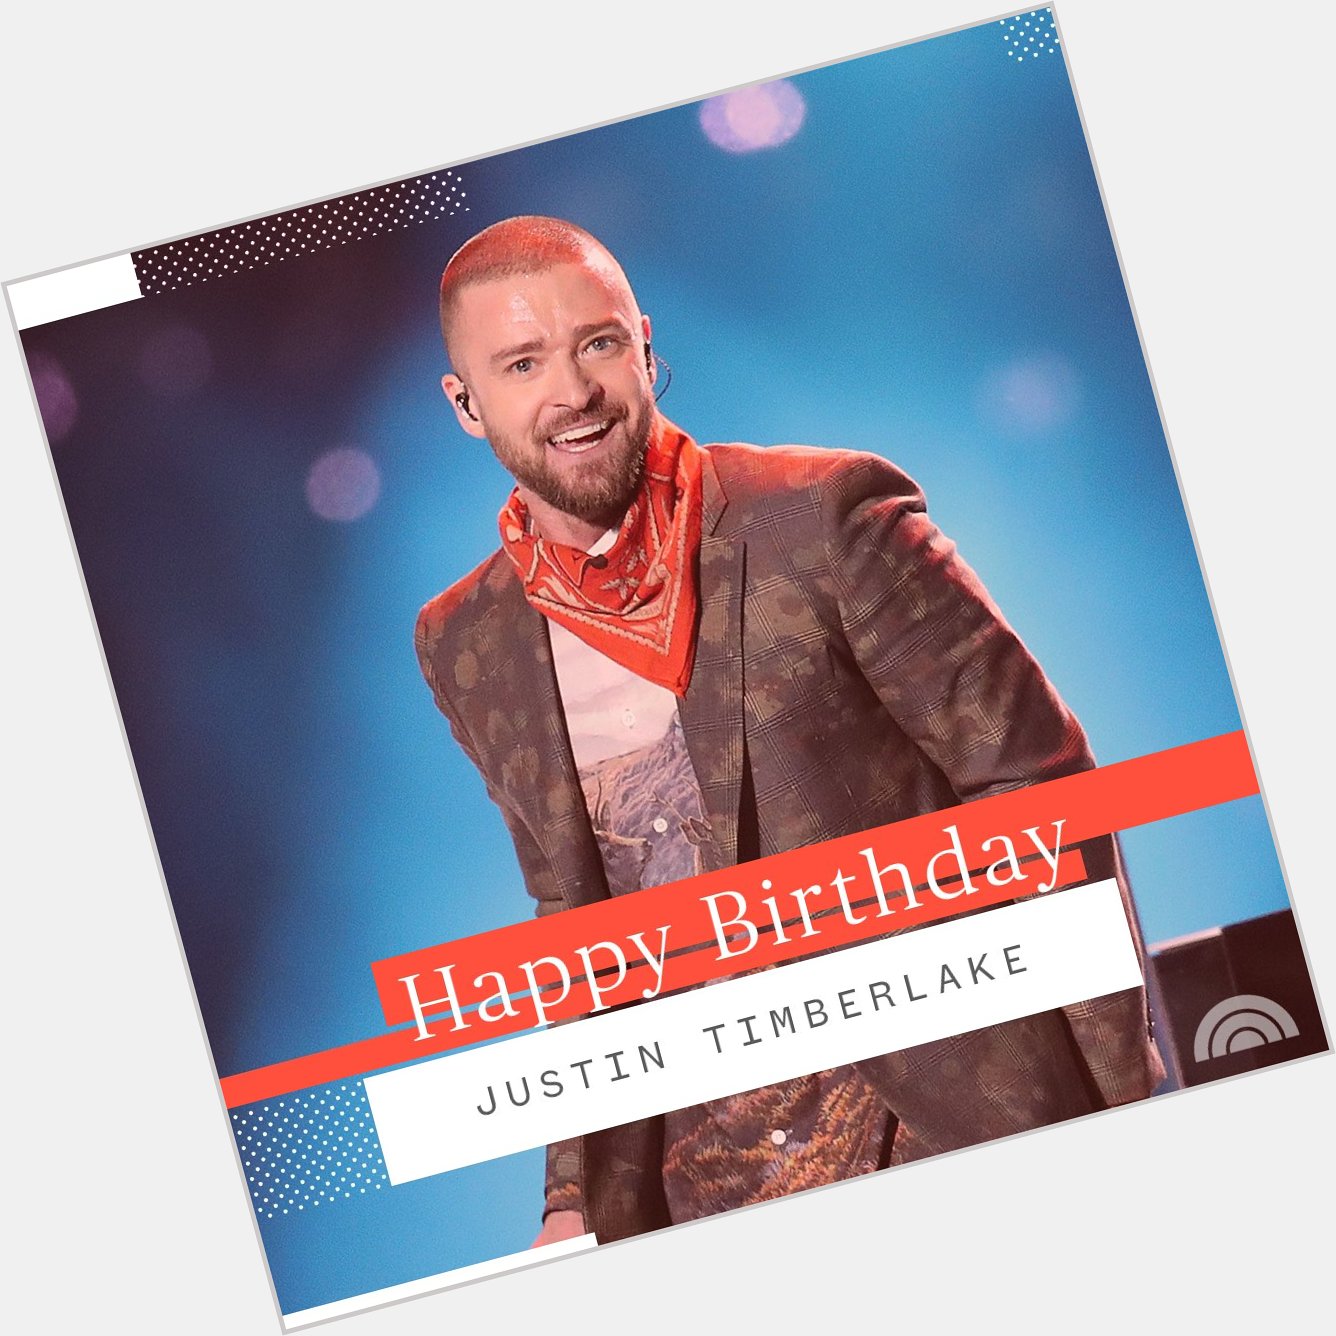 We can t stop wishing Justin Timberlake a happy birthday!  